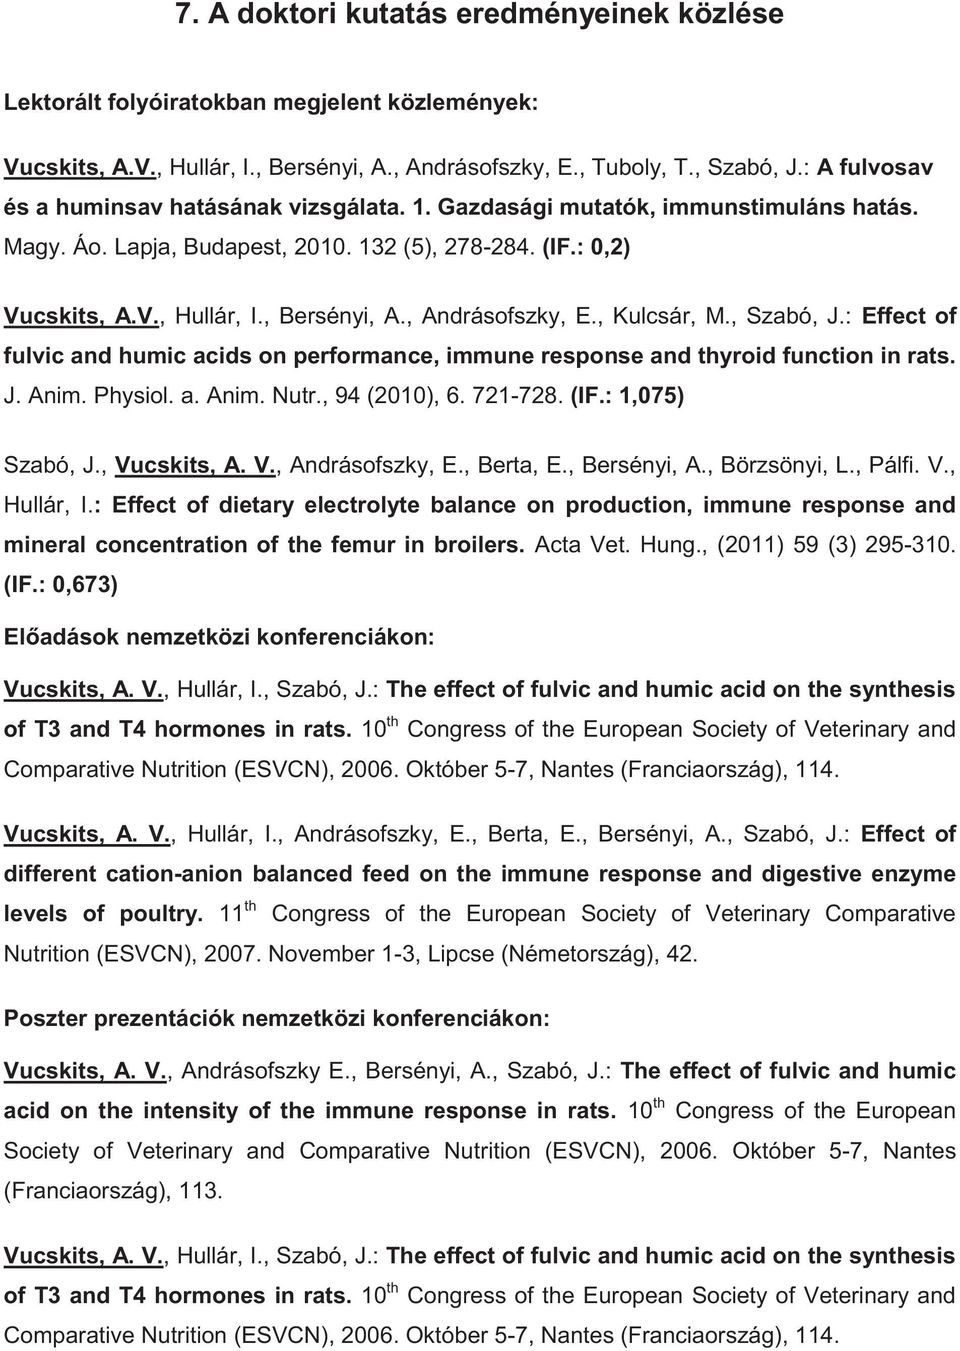 , Andrásofszky, E., Kulcsár, M., Szabó, J.: Effect of fulvic and humic acids on performance, immune response and thyroid function in rats. J. Anim. Physiol. a. Anim. Nutr., 94 (2010), 6. 721-728. (IF.